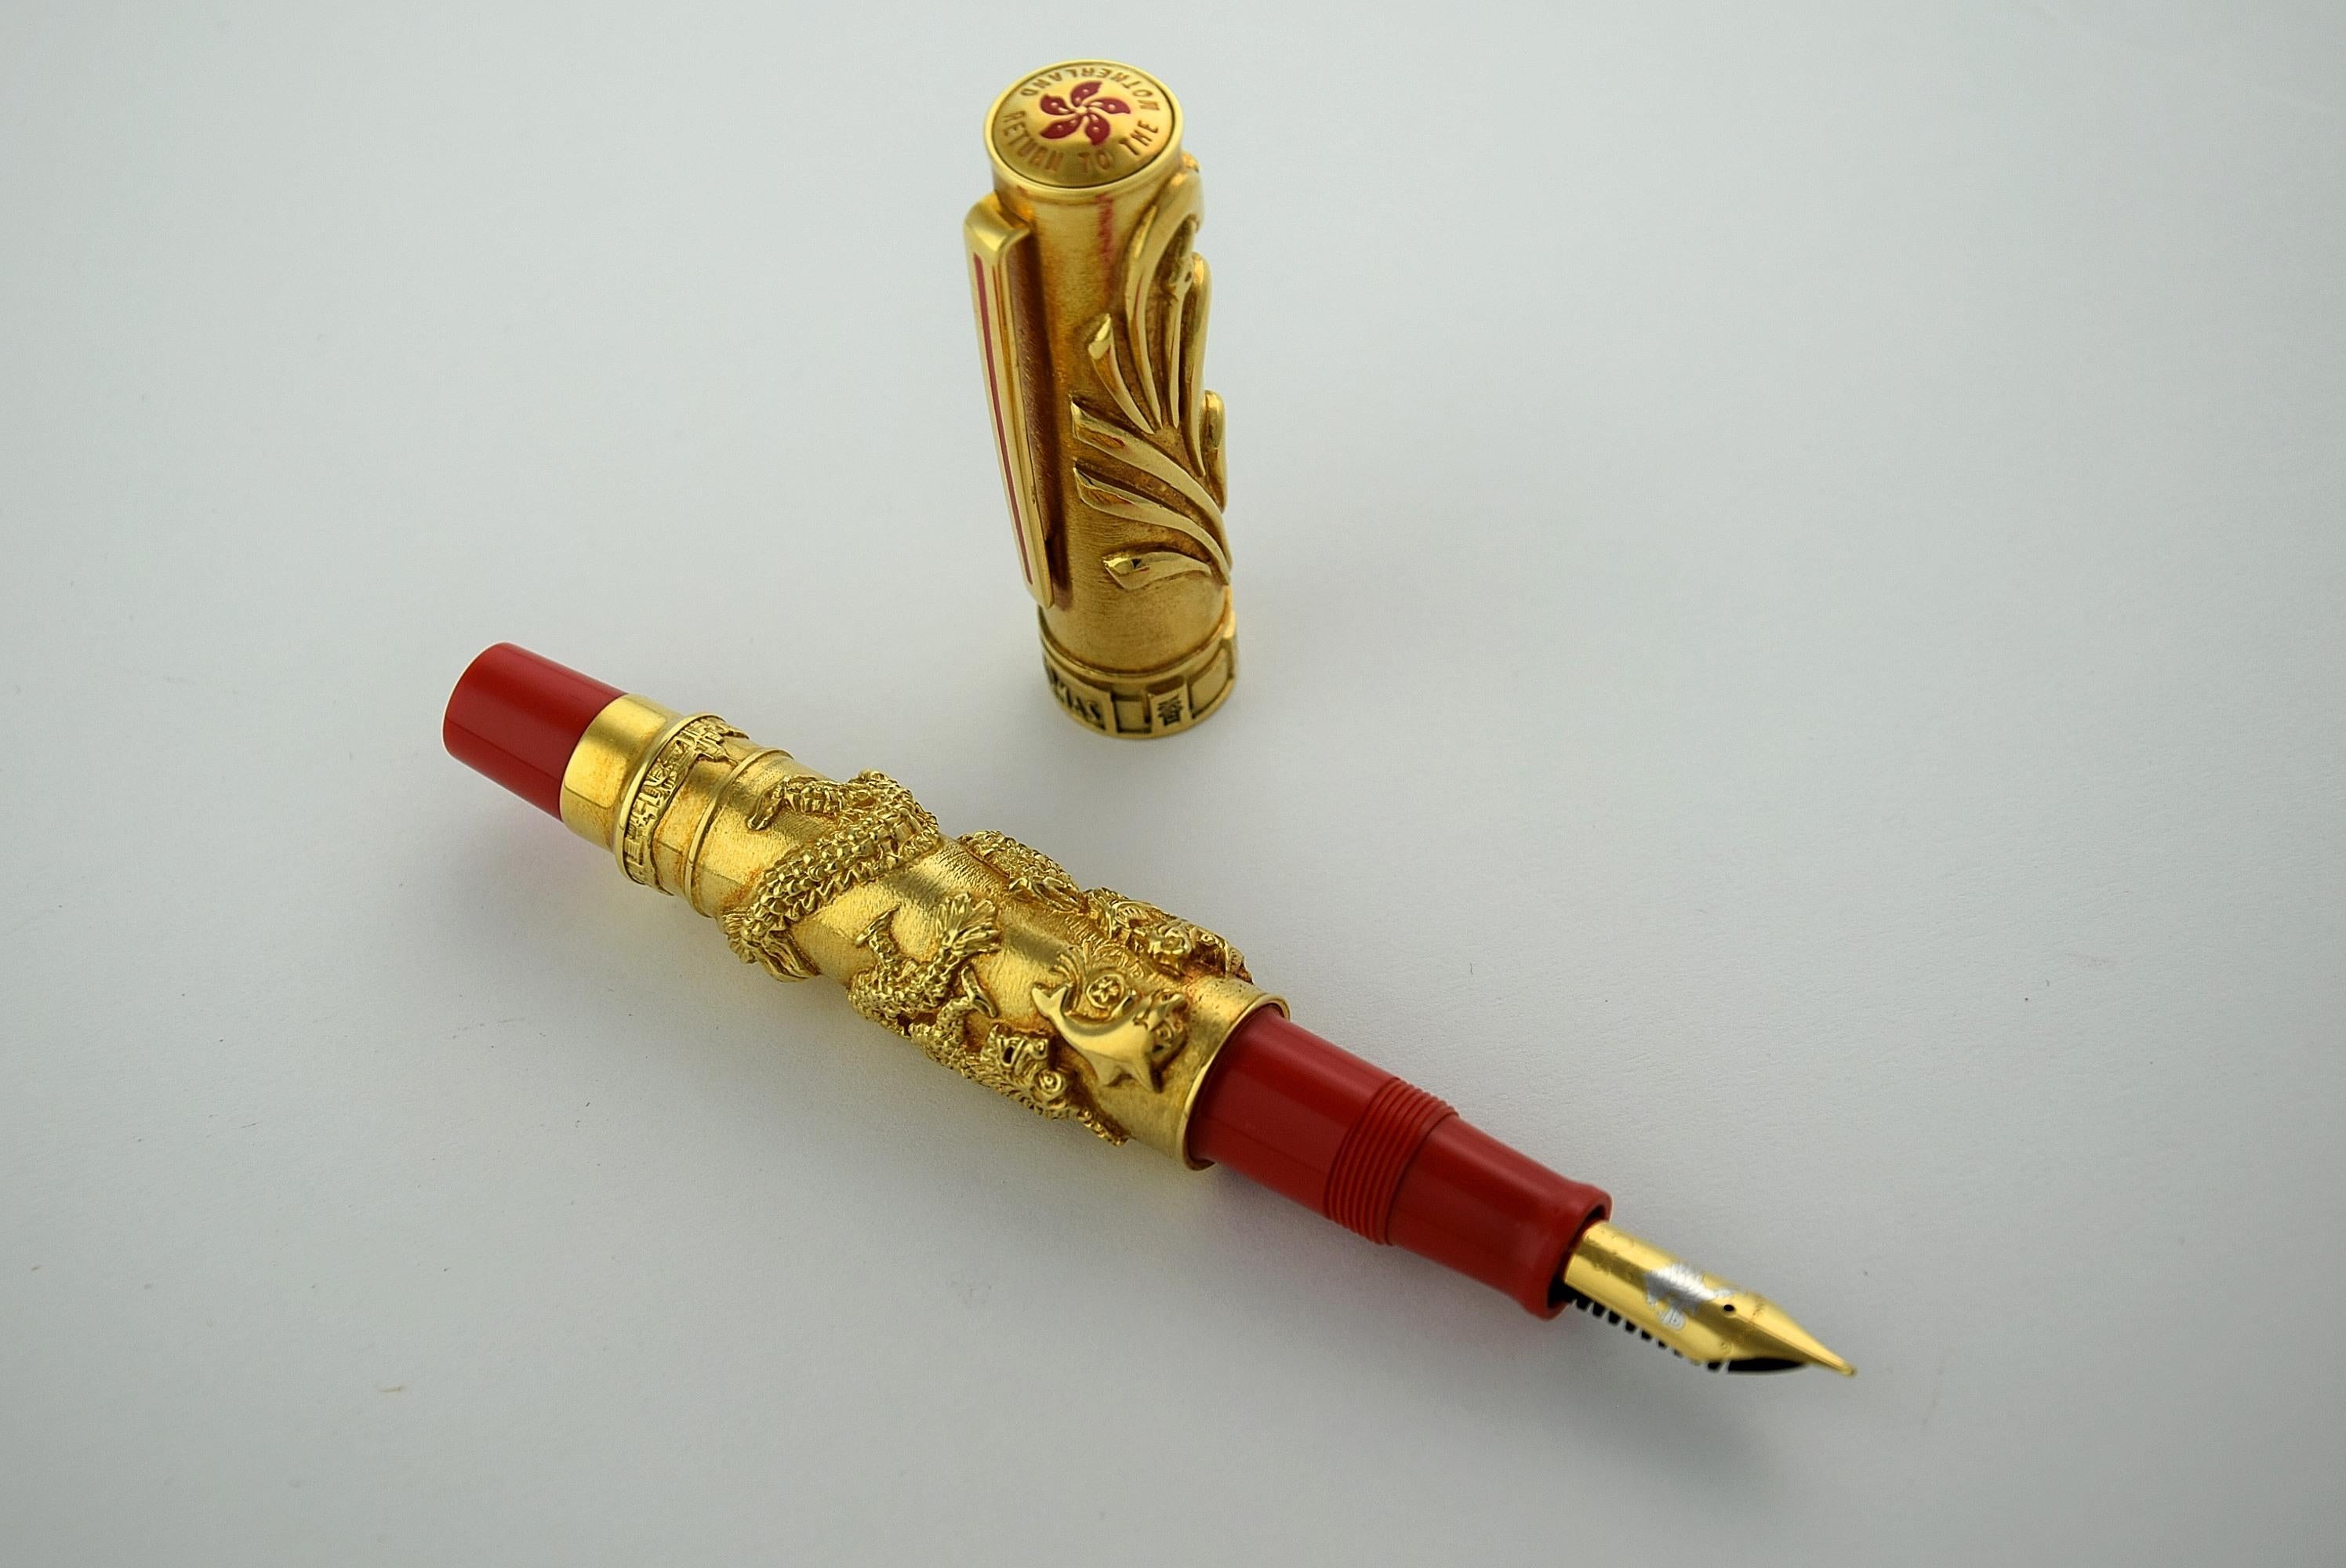 Omas 1997 18-Karat Gold Return to the Motherland Limited Edition Fountain Pen For Sale 9